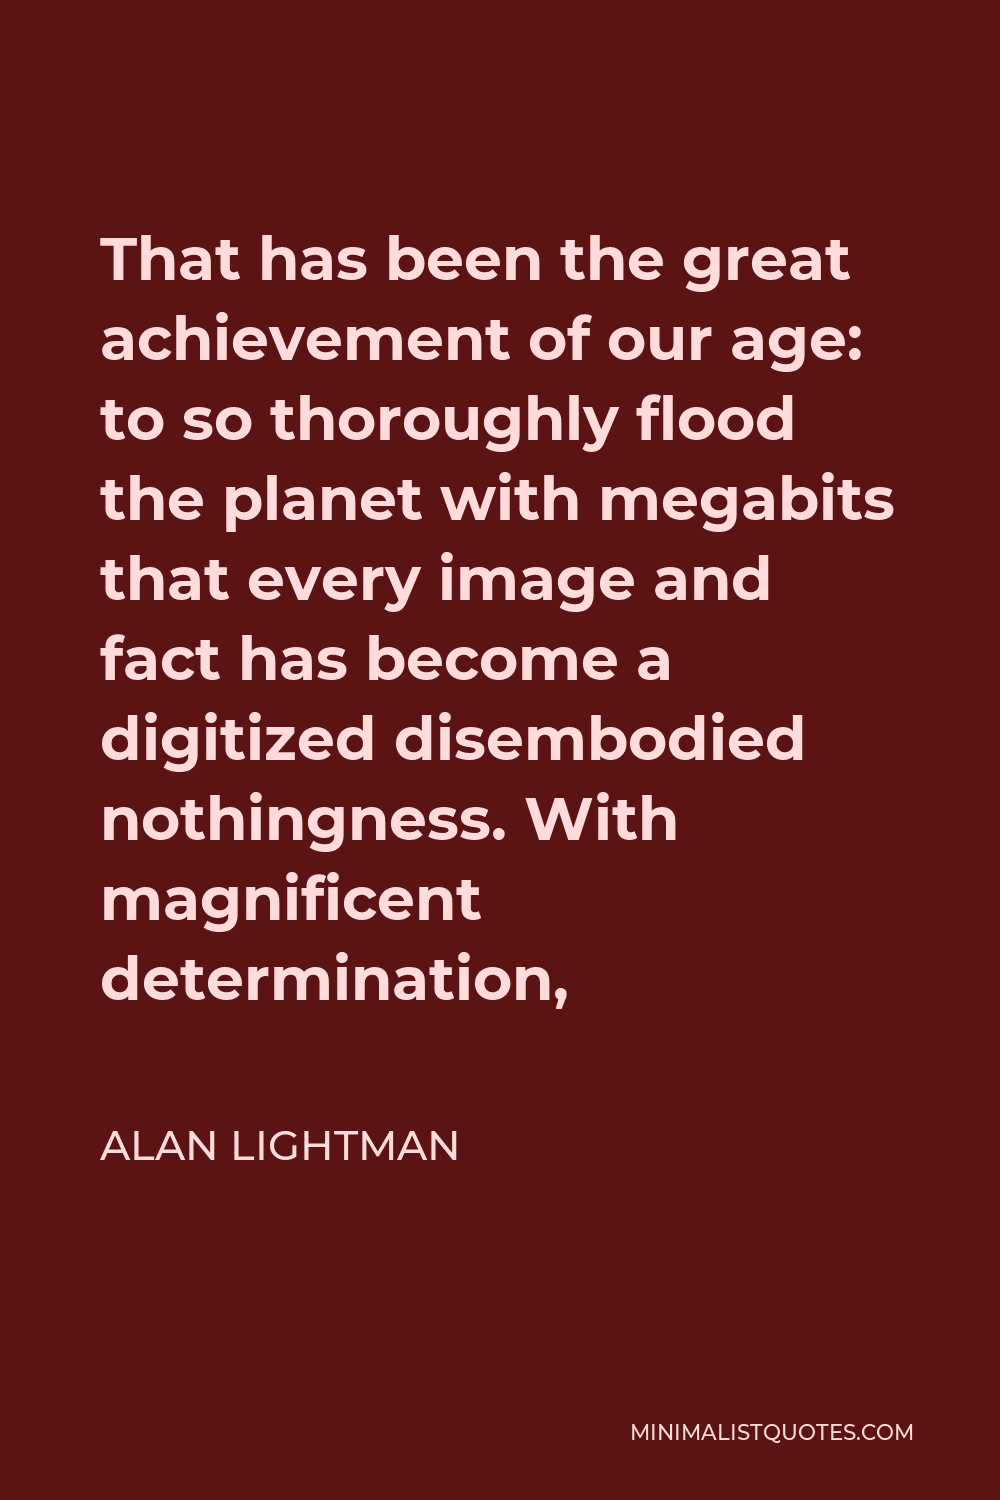 Alan Lightman Quote - That has been the great achievement of our age: to so thoroughly flood the planet with megabits that every image and fact has become a digitized disembodied nothingness. With magnificent determination,